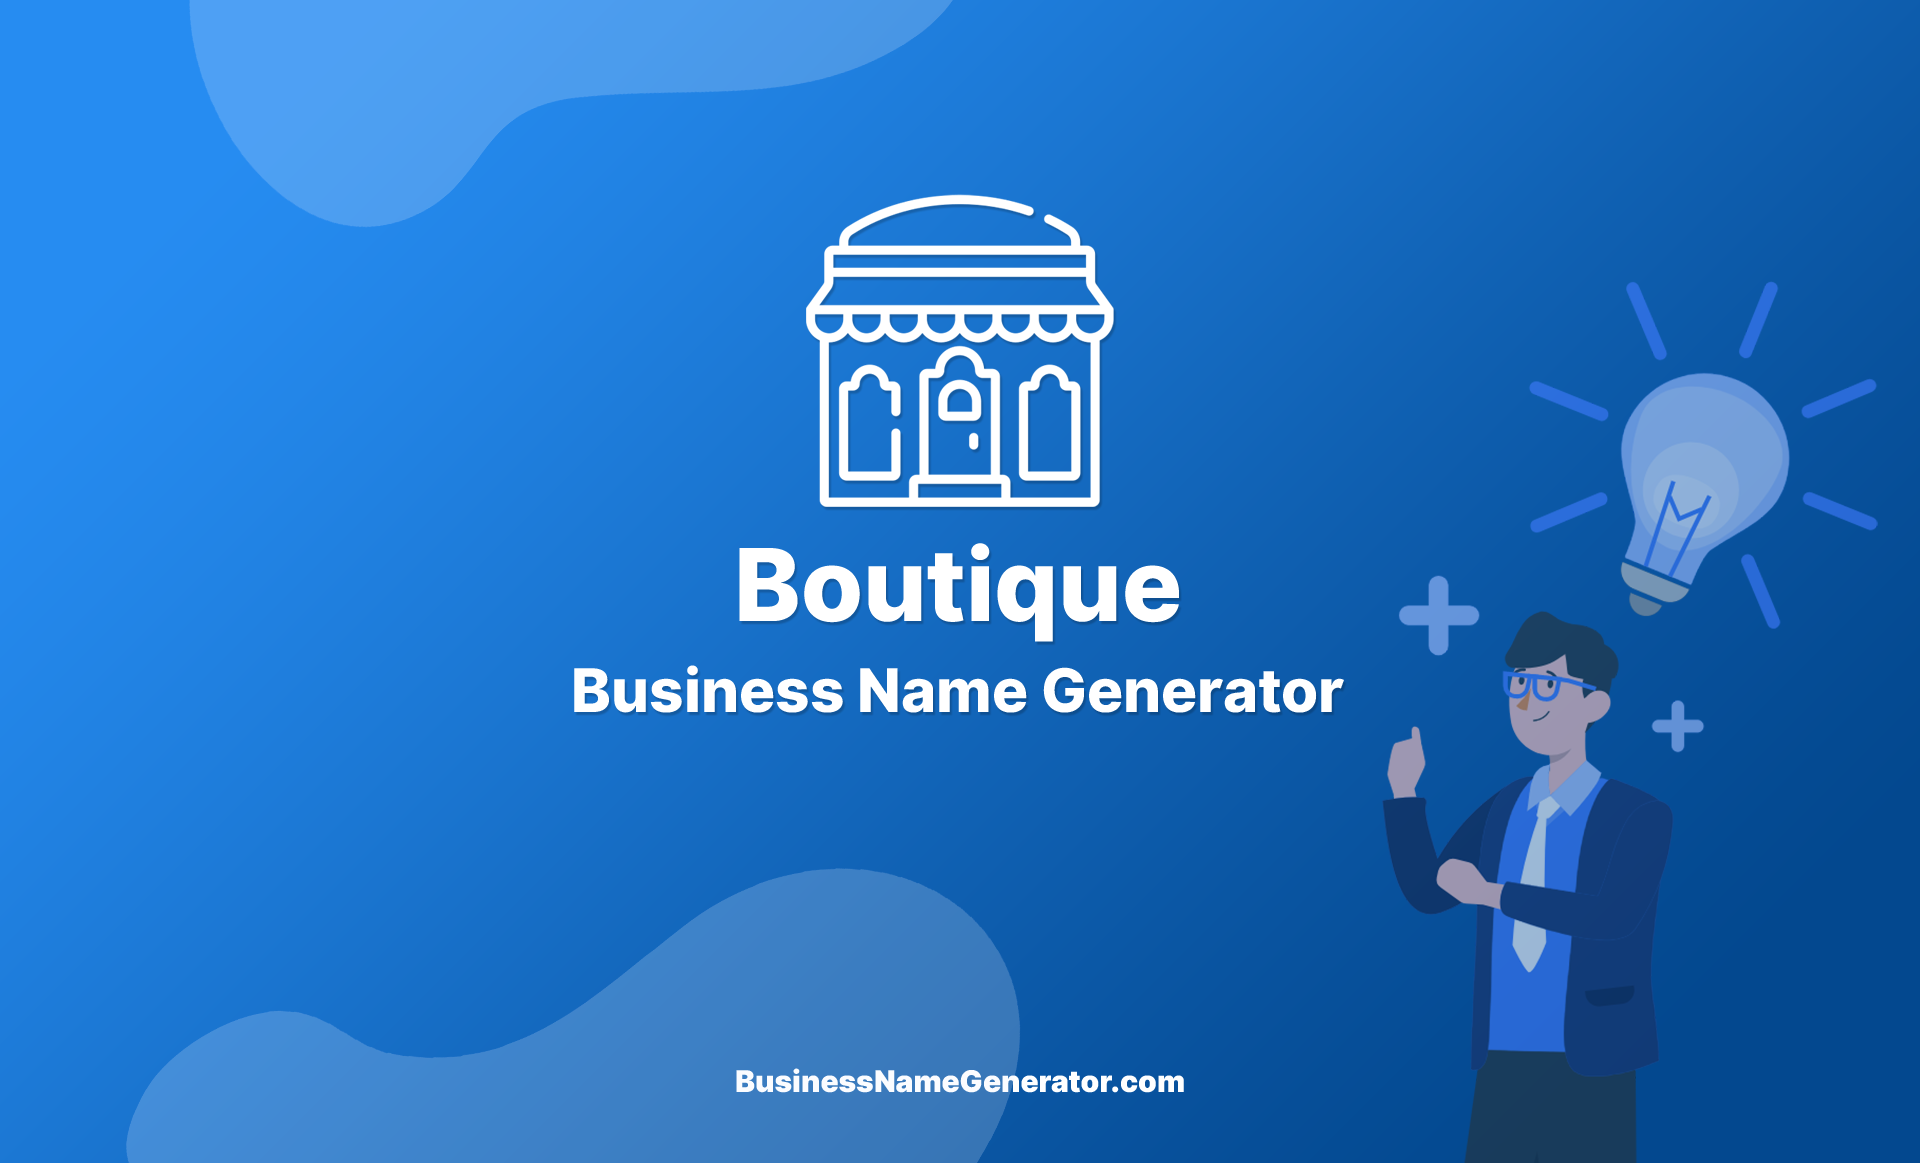 Boutique Business Name Generator Guide & Ideas